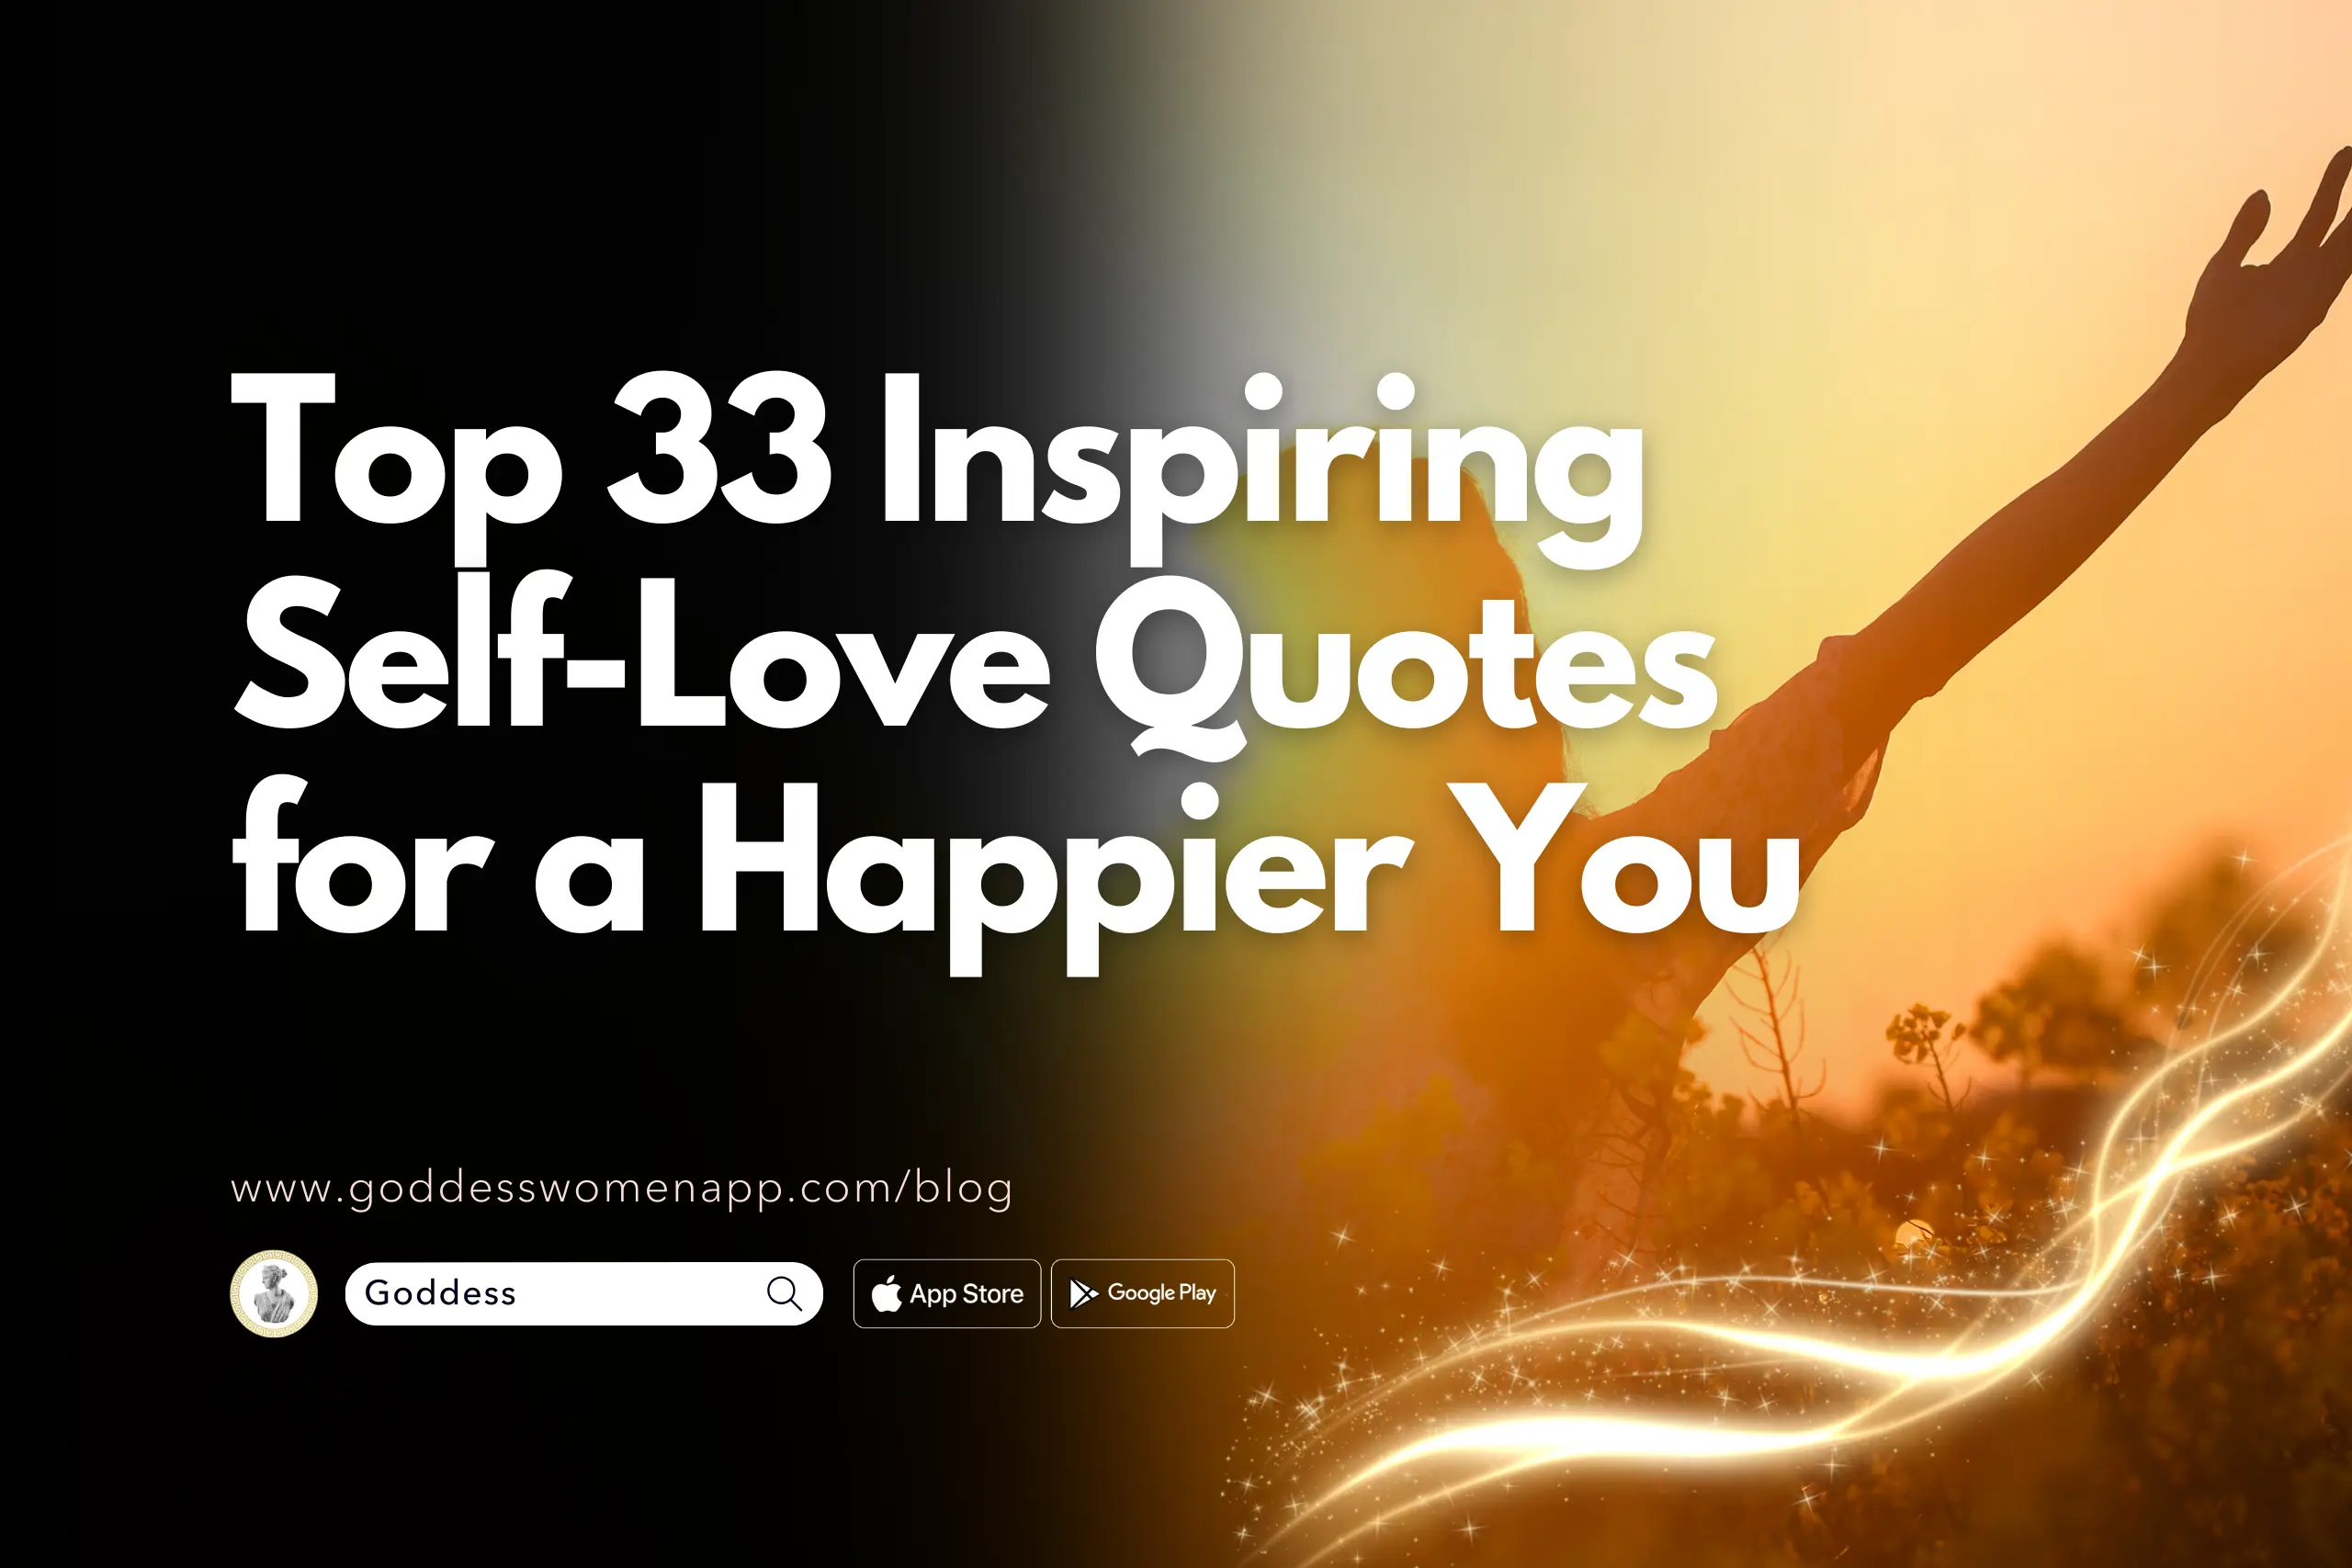 Top 33 Inspiring Self-Love Quotes for a Happier You